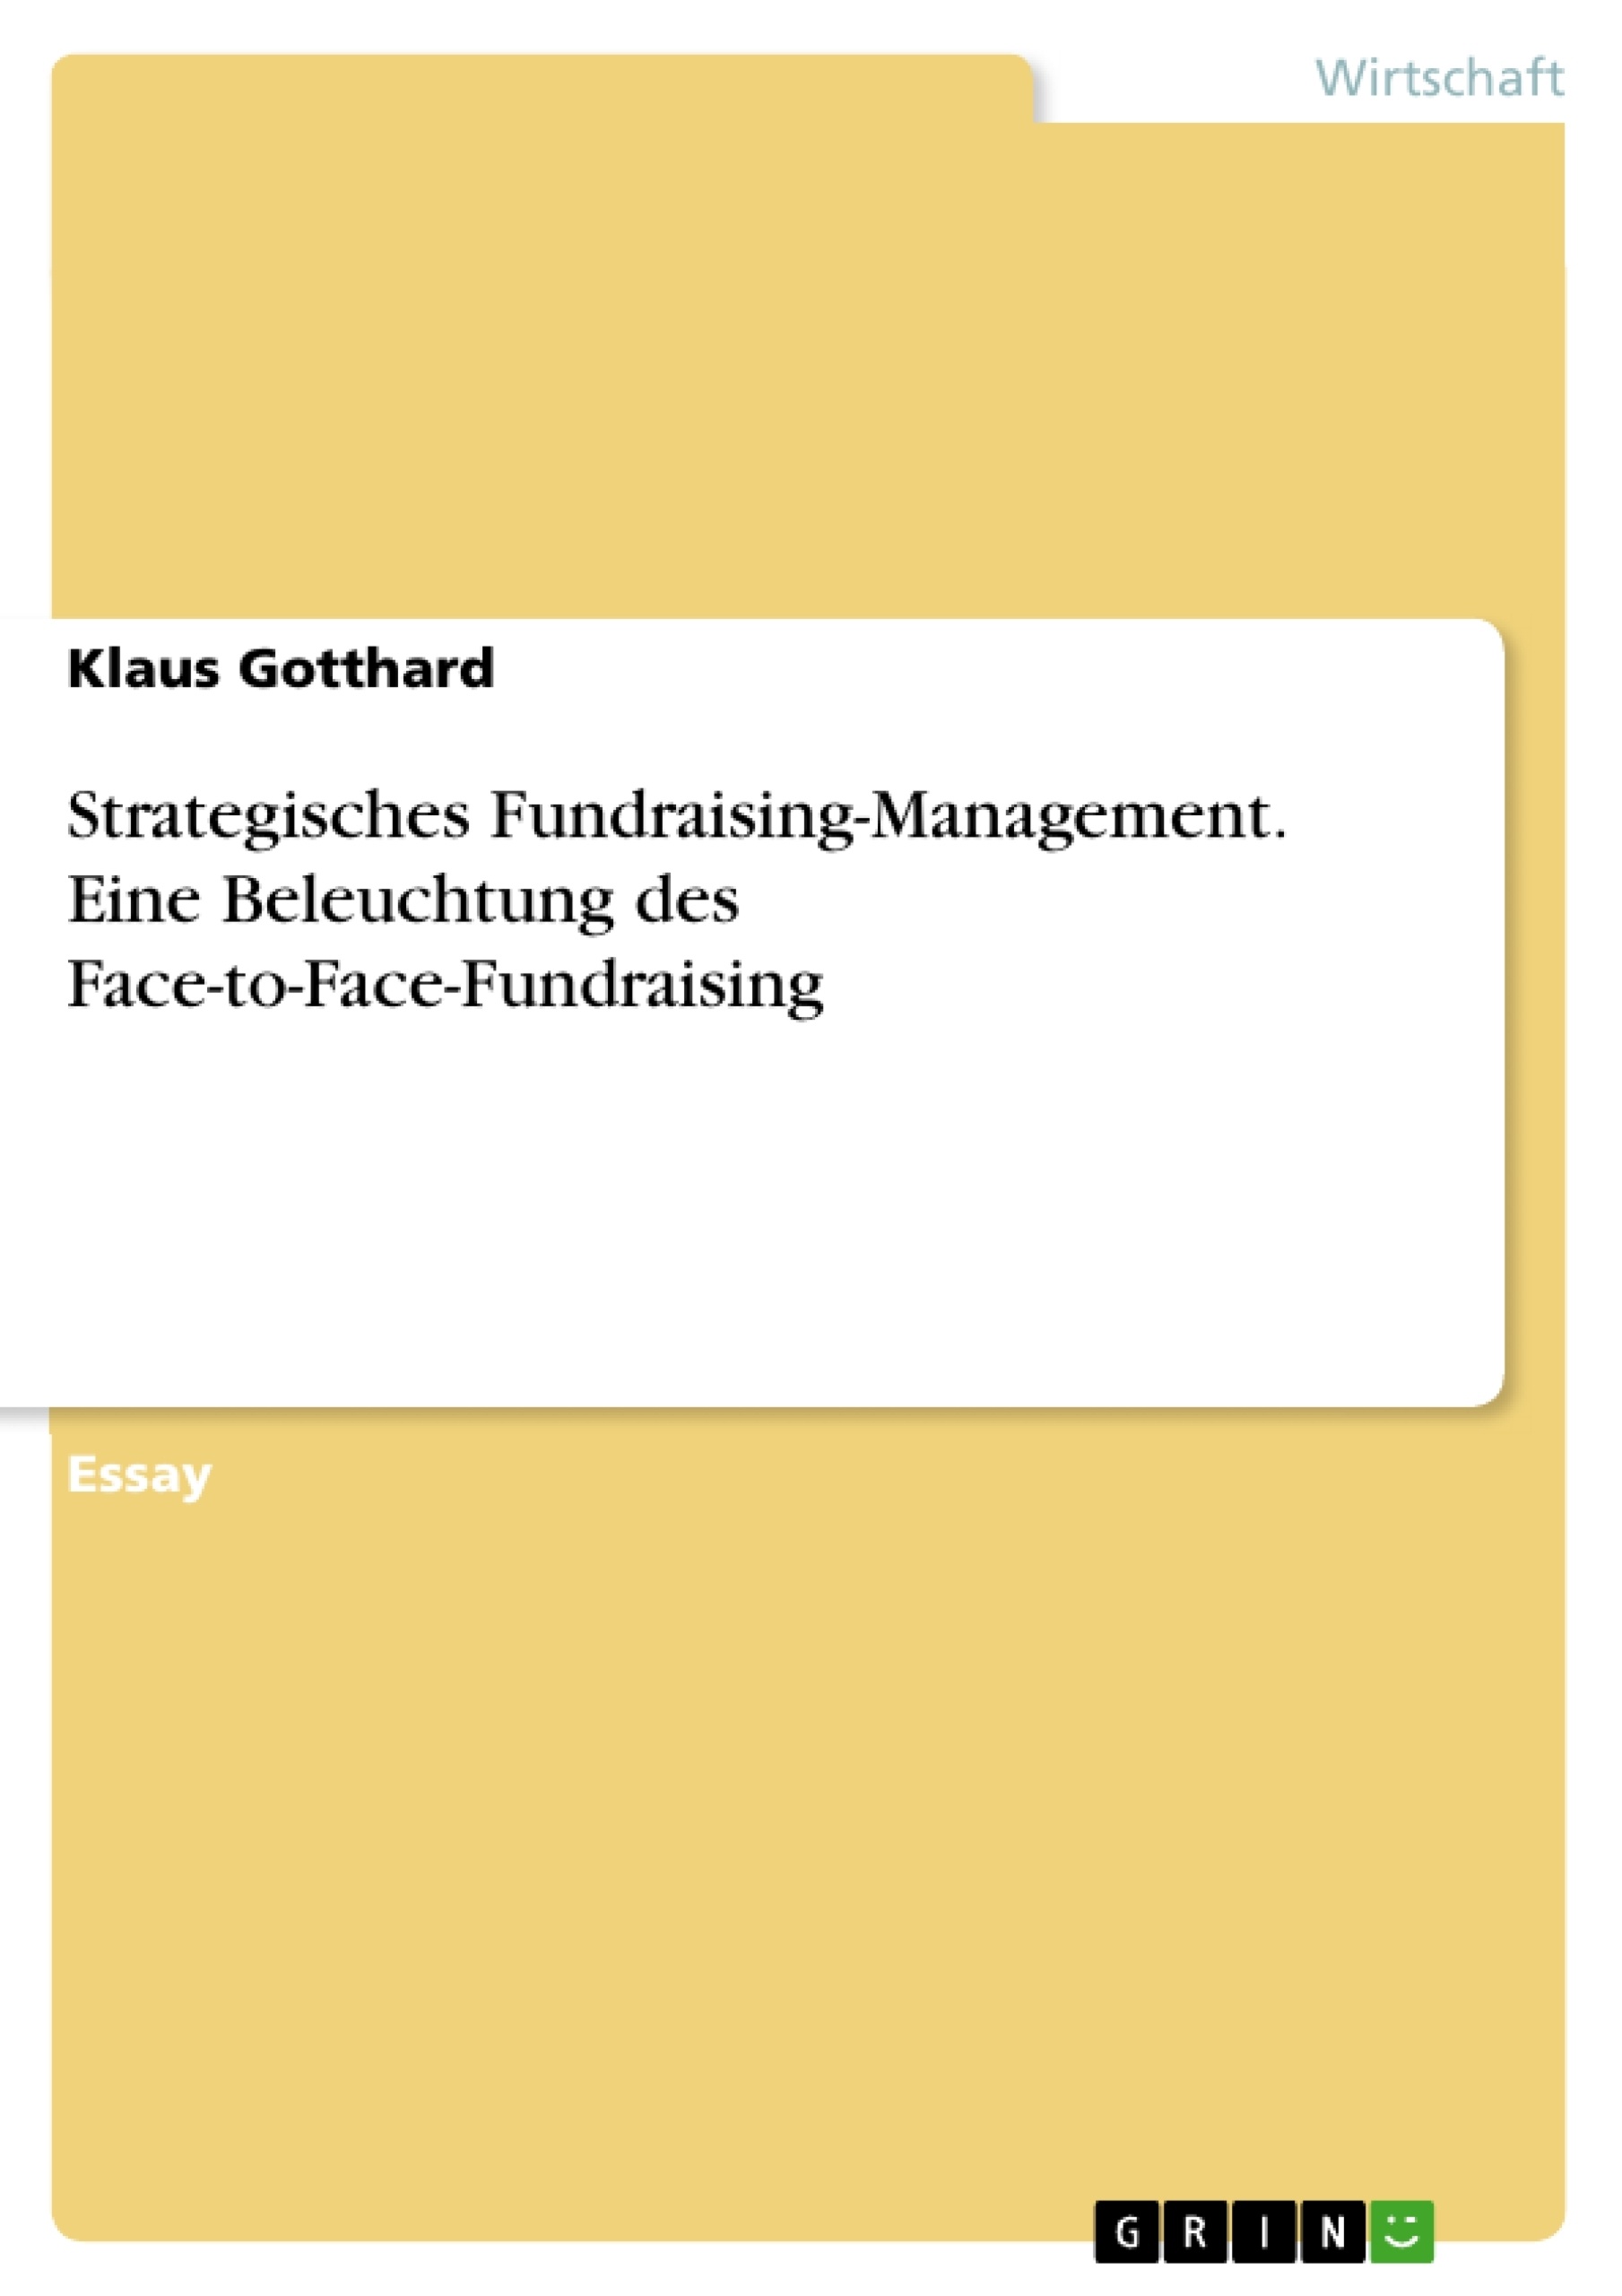 Title: Strategisches Fundraising-Management. Eine Beleuchtung des Face-to-Face-Fundraising